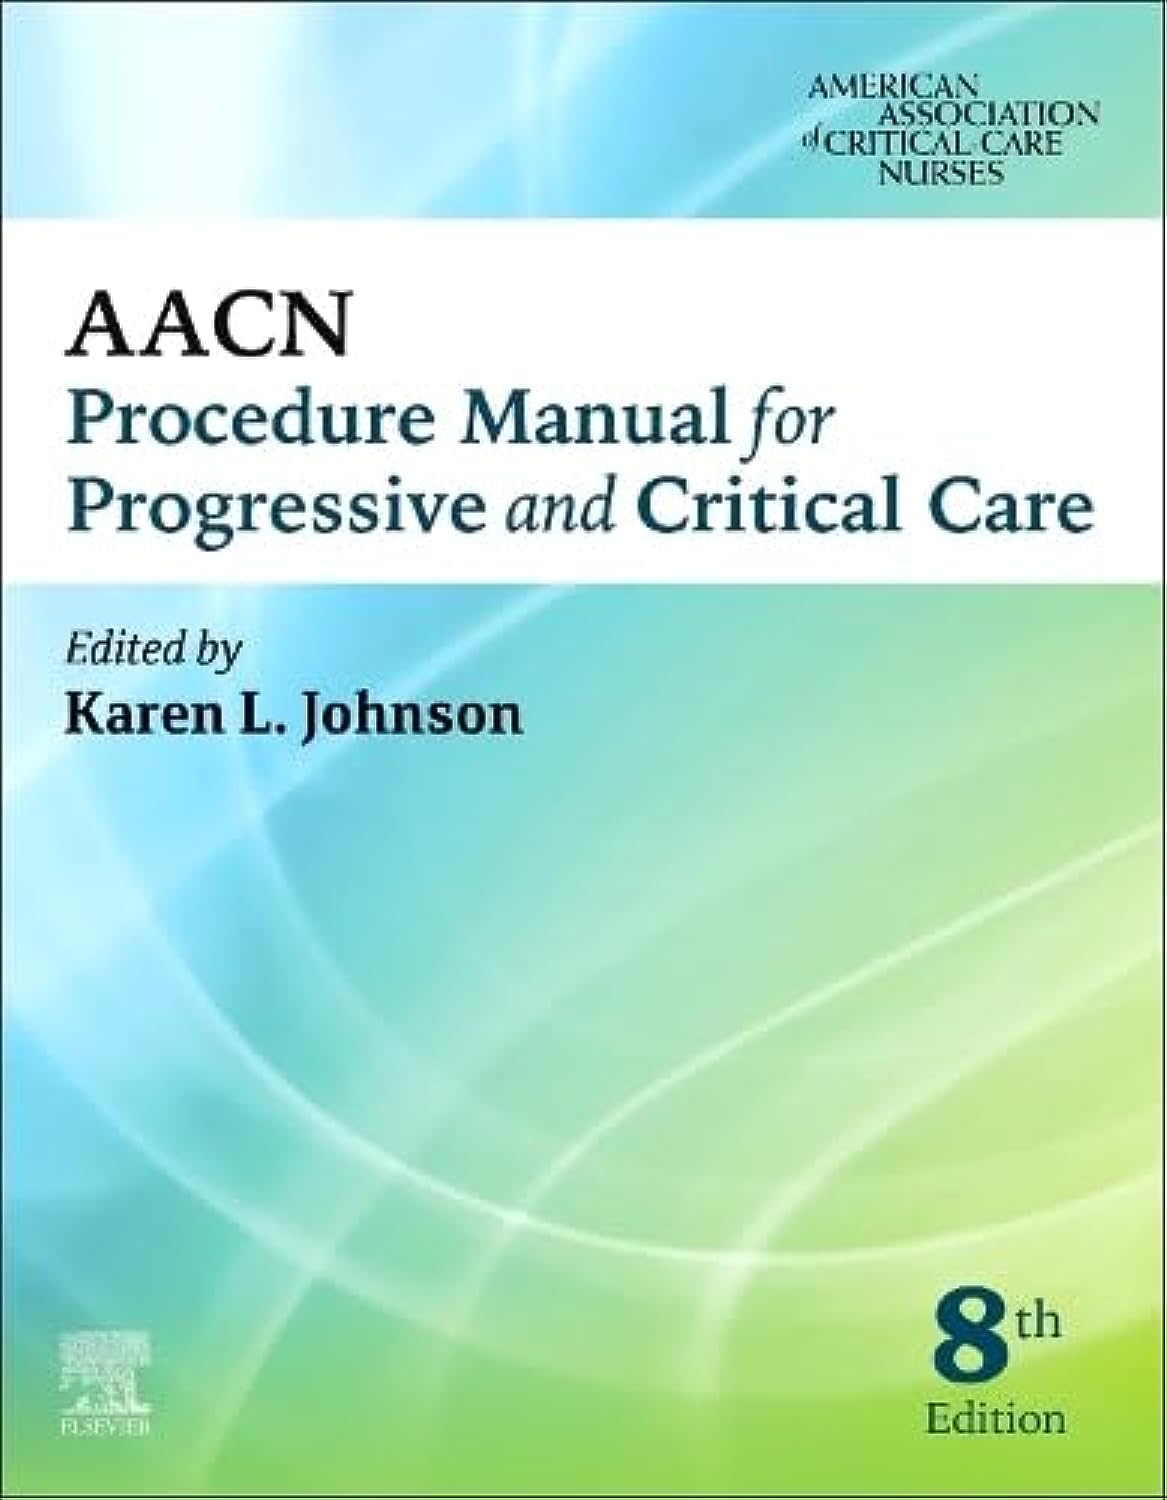 AACN Procedure Manual for Progressive and Critical Care (AACN Procedure Manual for Critical Care) 8th Edition